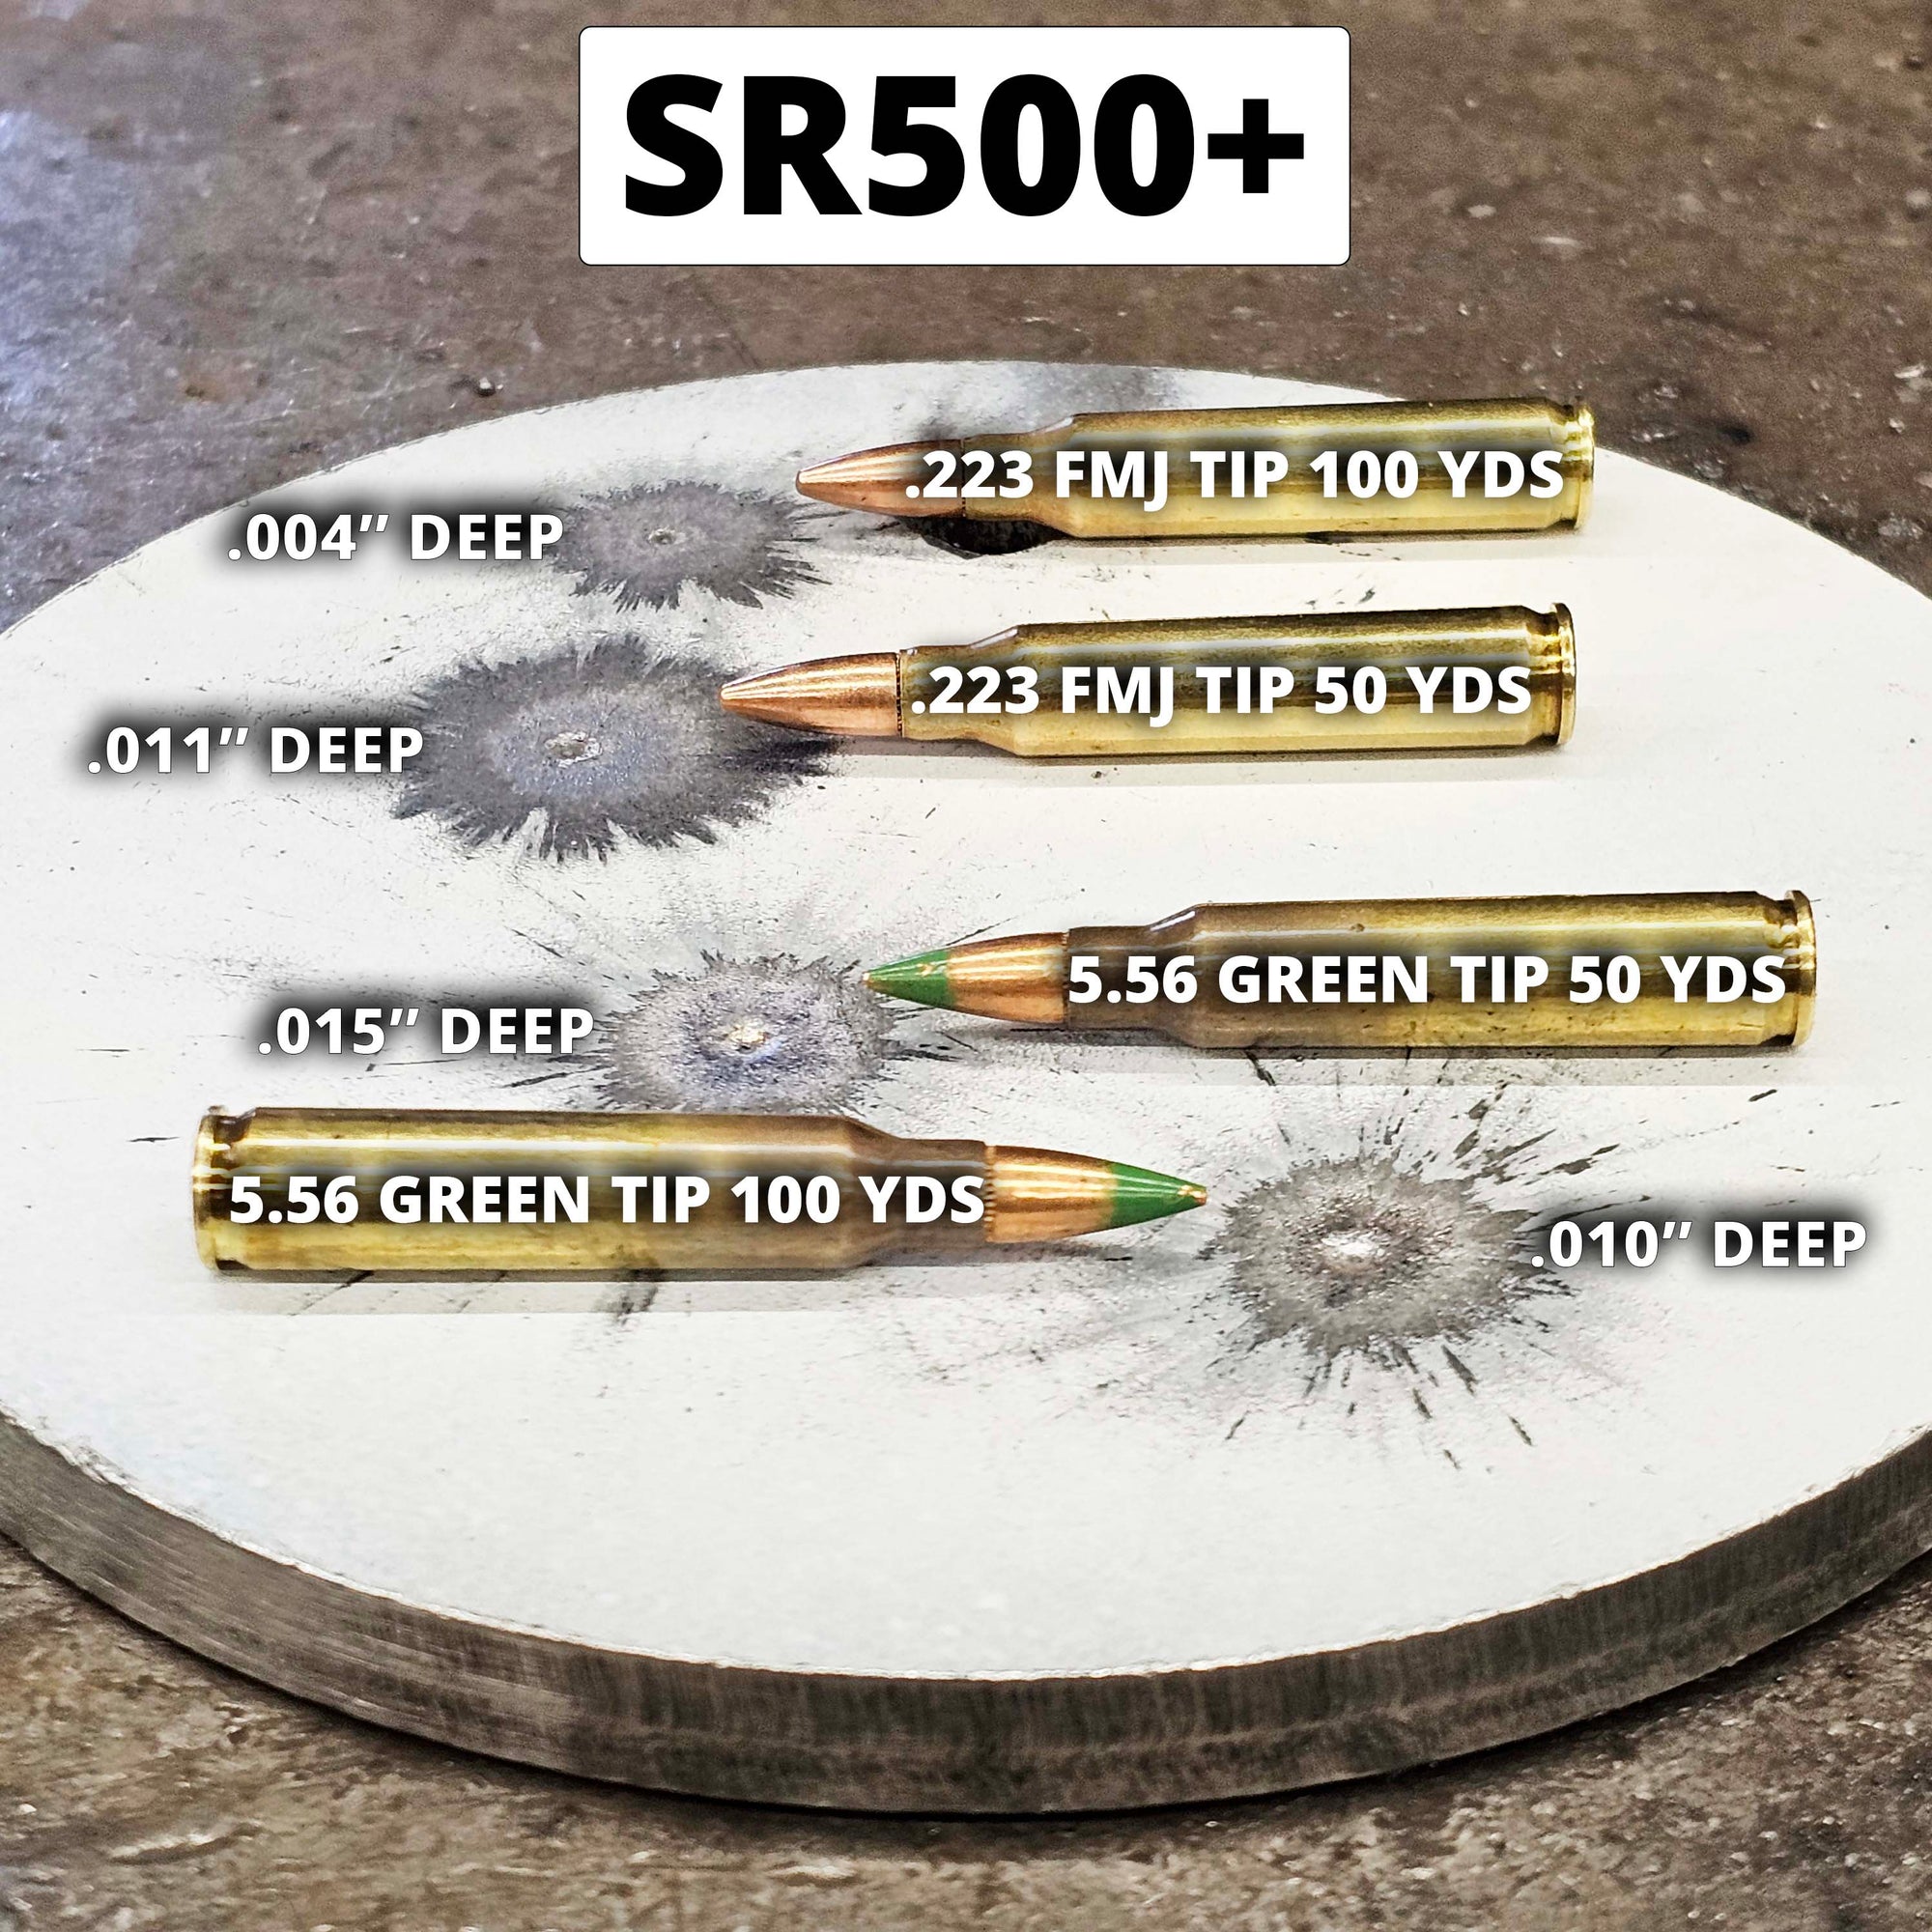 image showing the pits of various calibers at 50 and 100 yds on an SR500+ steel target